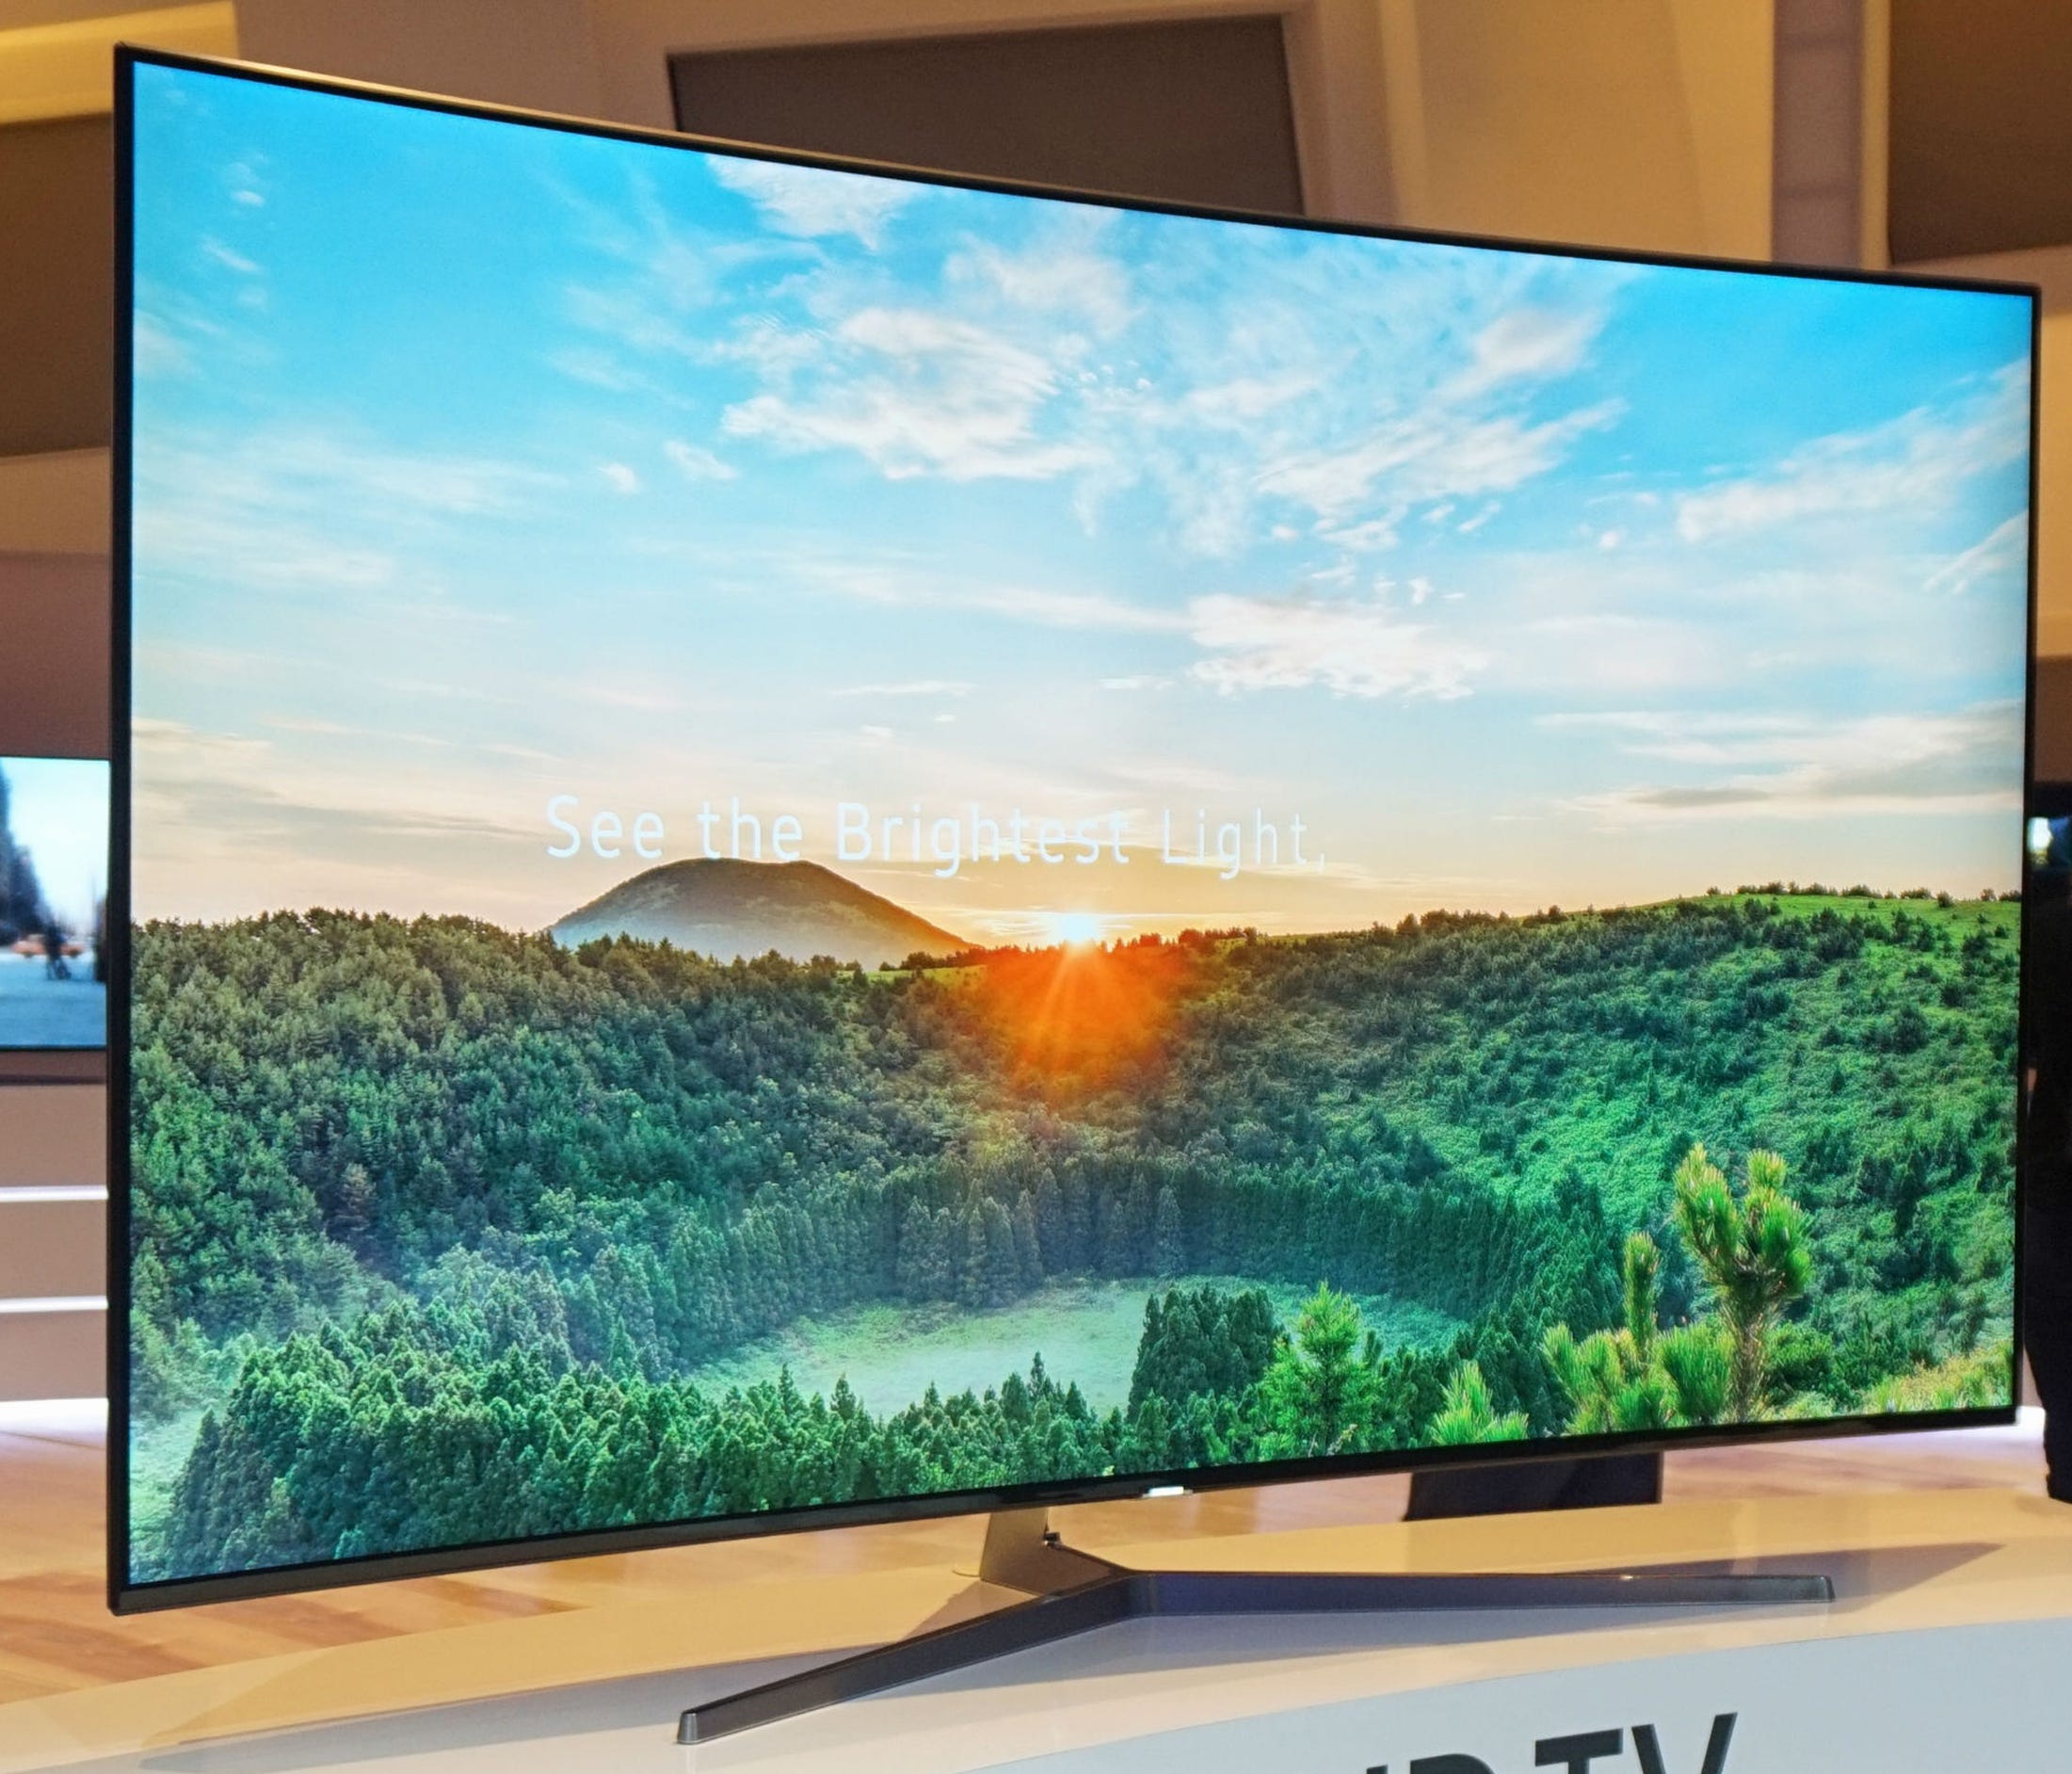 5 reasons you should buy an HDR TV, even if you have no idea what that means